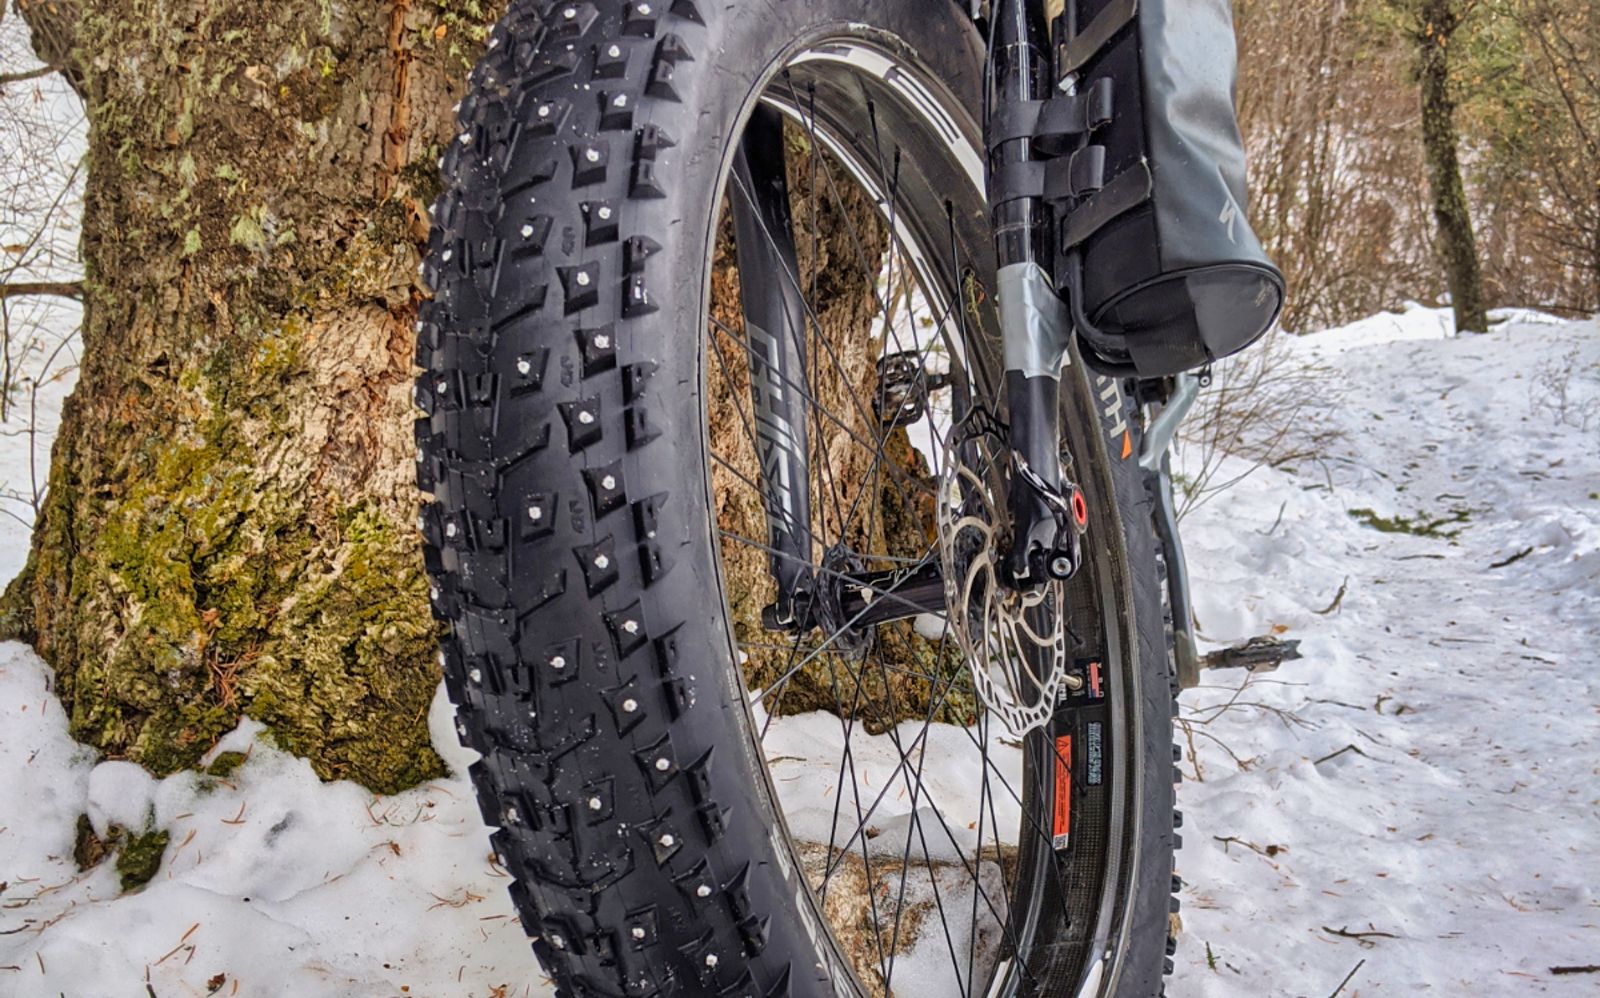 Fatbike front tire with studs in the snow